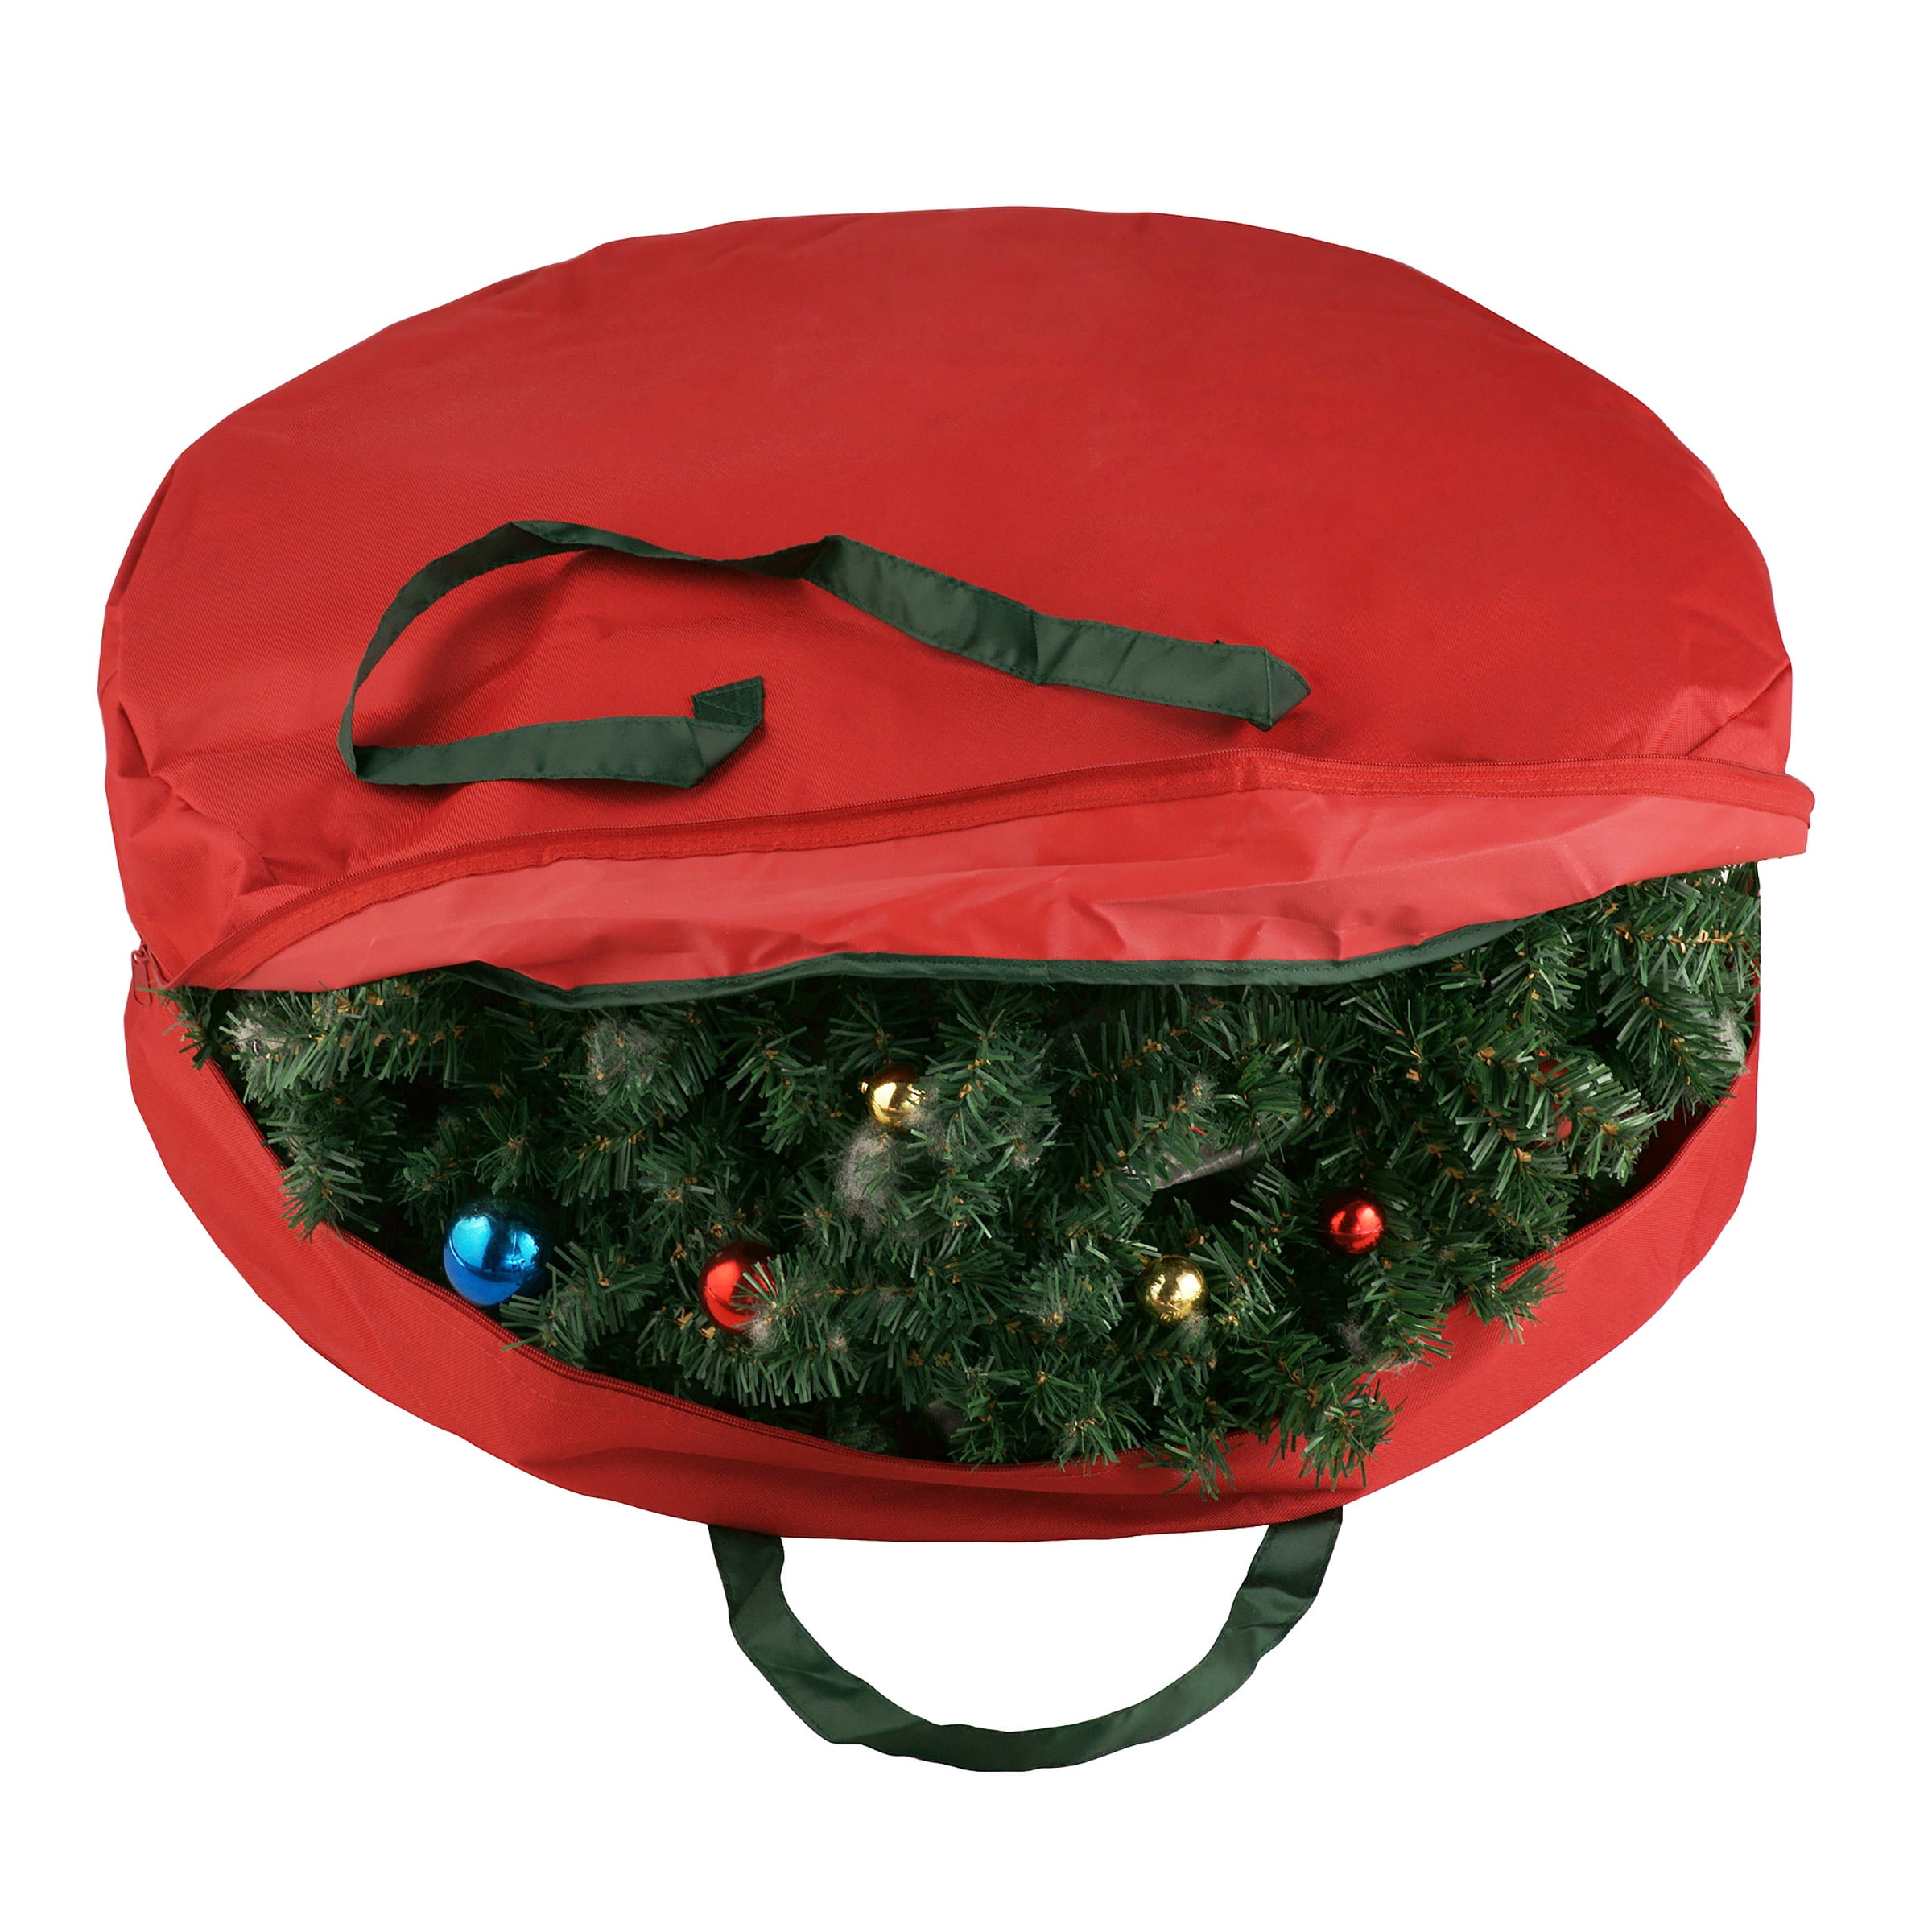 Reinforced Handle and Easy to Slip The Wreath in and Out Christmas Wreath Storage Bag and Moisture.… 24 X 7 Protect Your Holiday Wreath from Dust Durable Tarp Material Insects Zippered